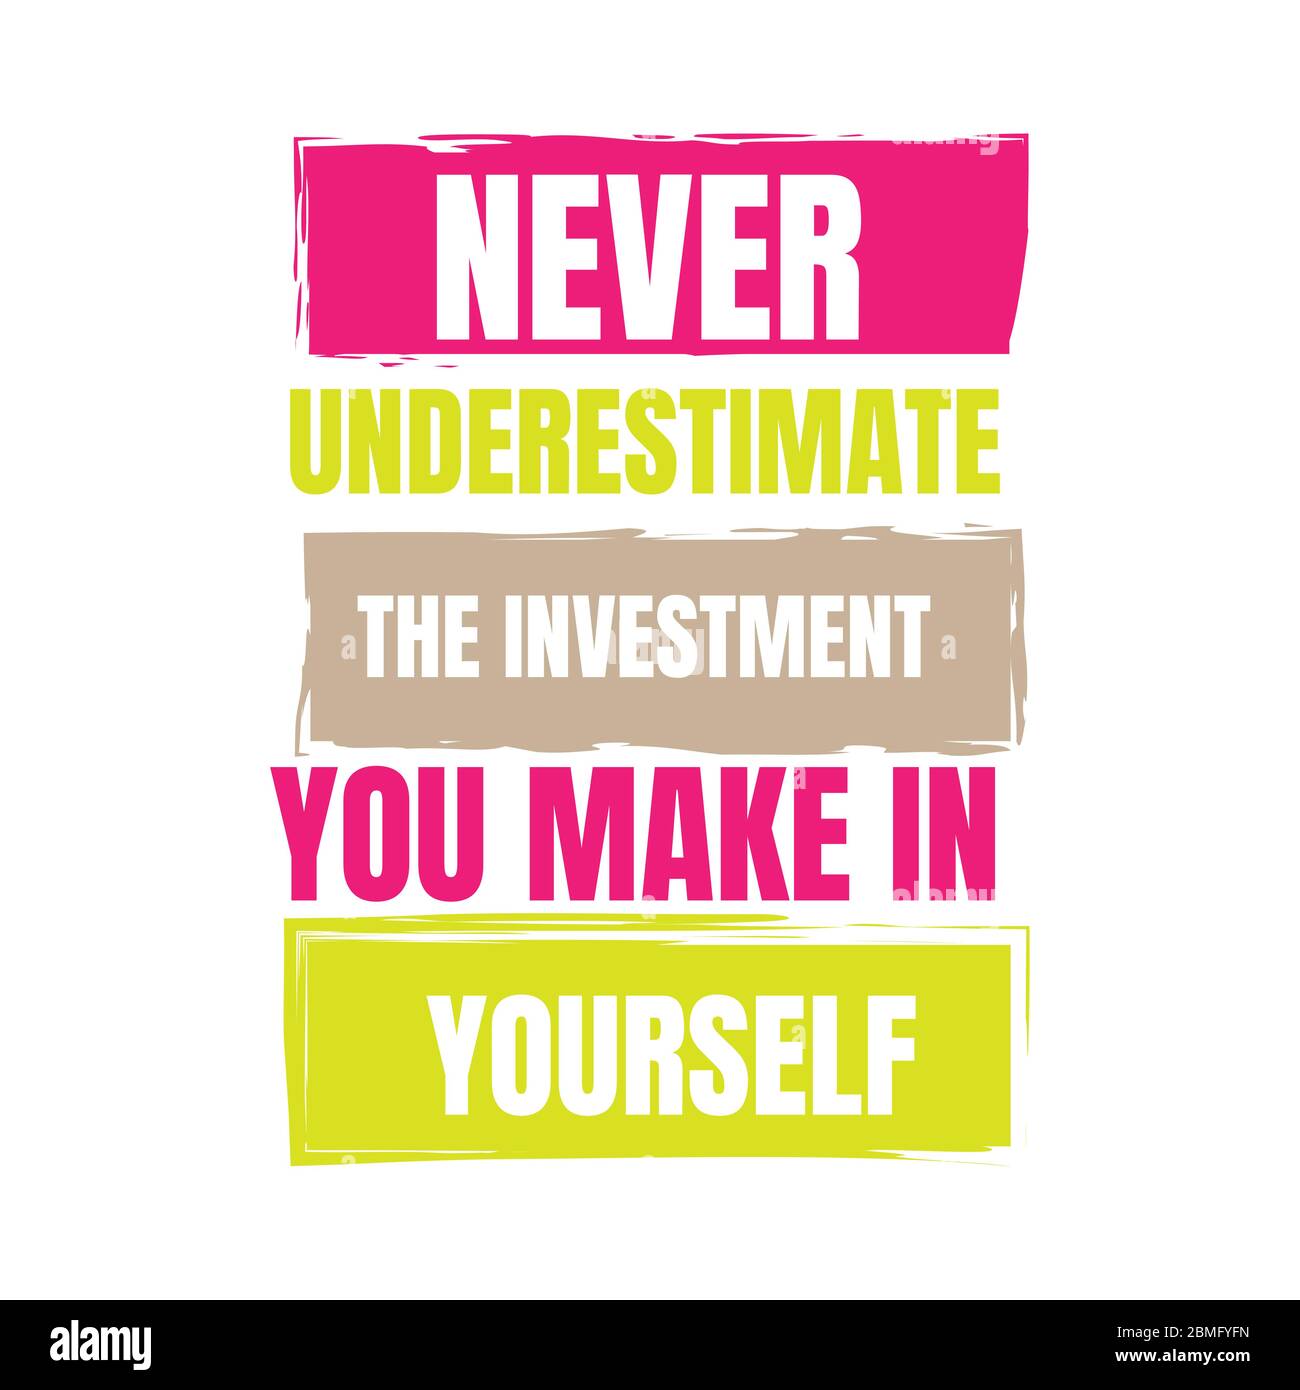 never underestimate yourself quotes